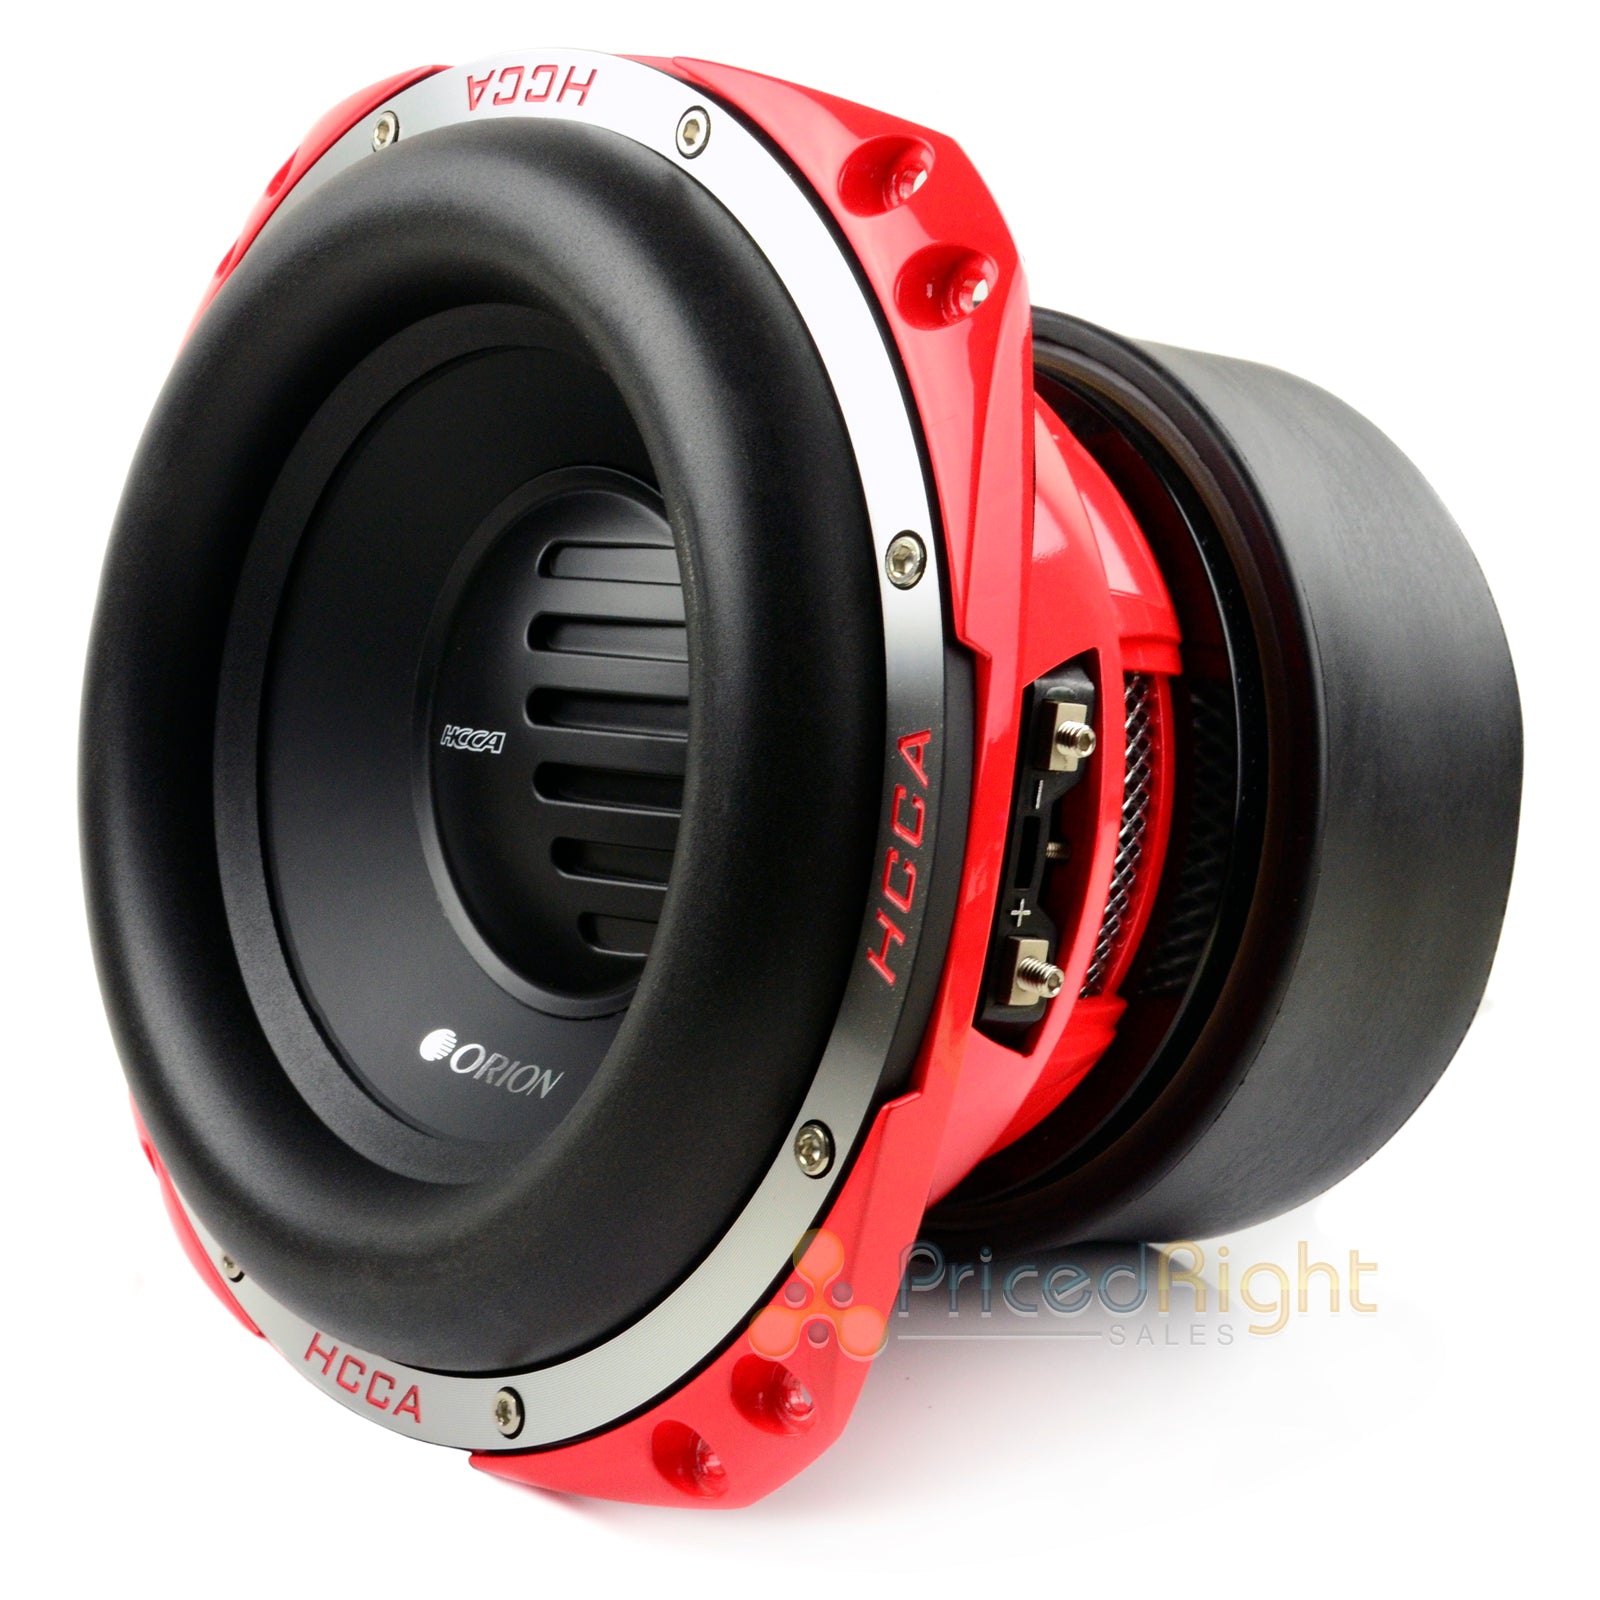 Orion HCCA102 10" Subwoofer 4000 Watt Dual 2 Ohm Voice Coil Bass Competition Sub